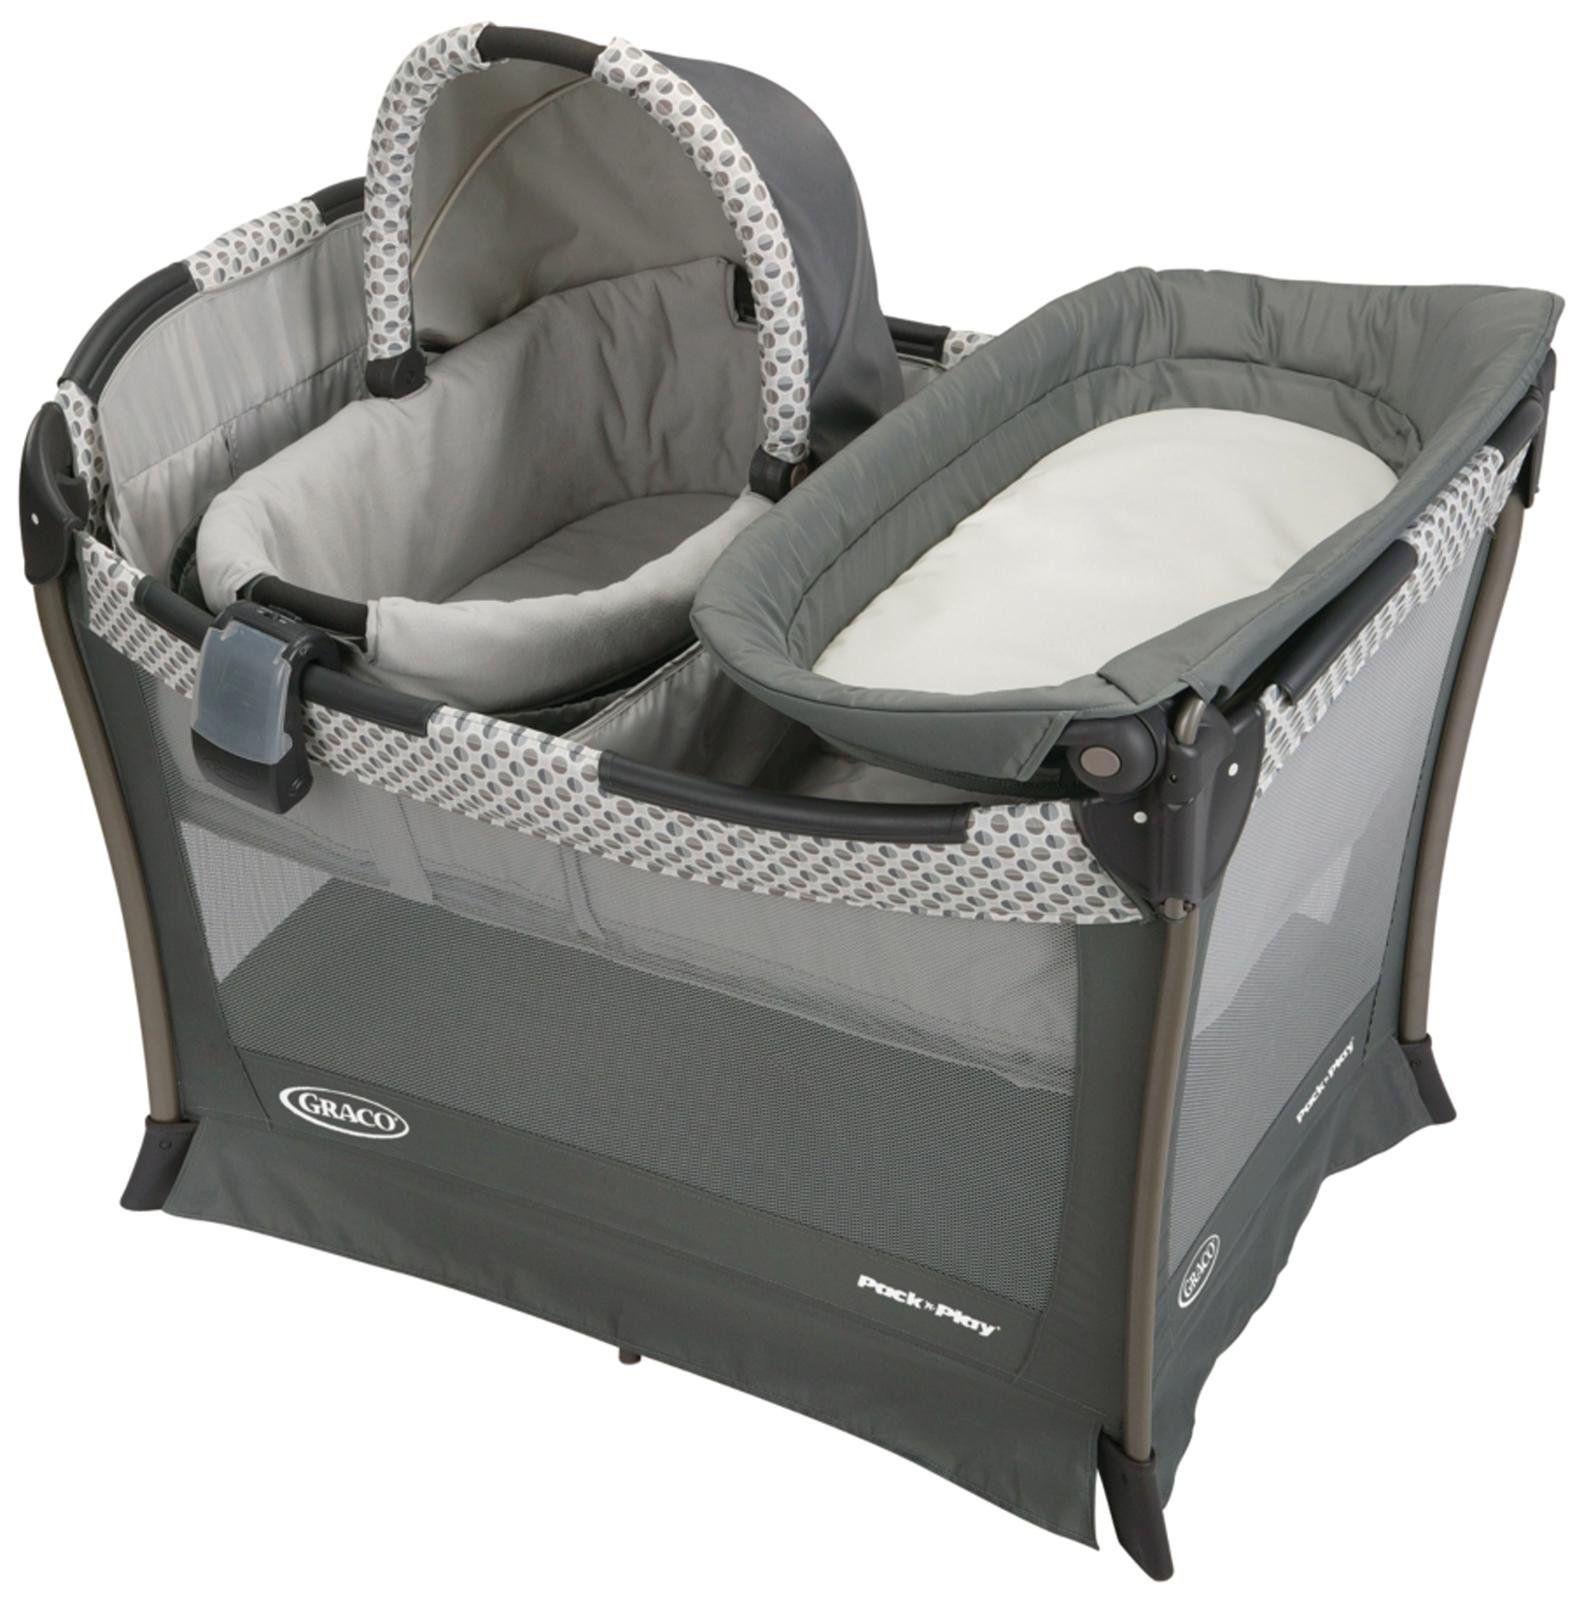 Earthshine reccomend Graco baby playards with vibrator